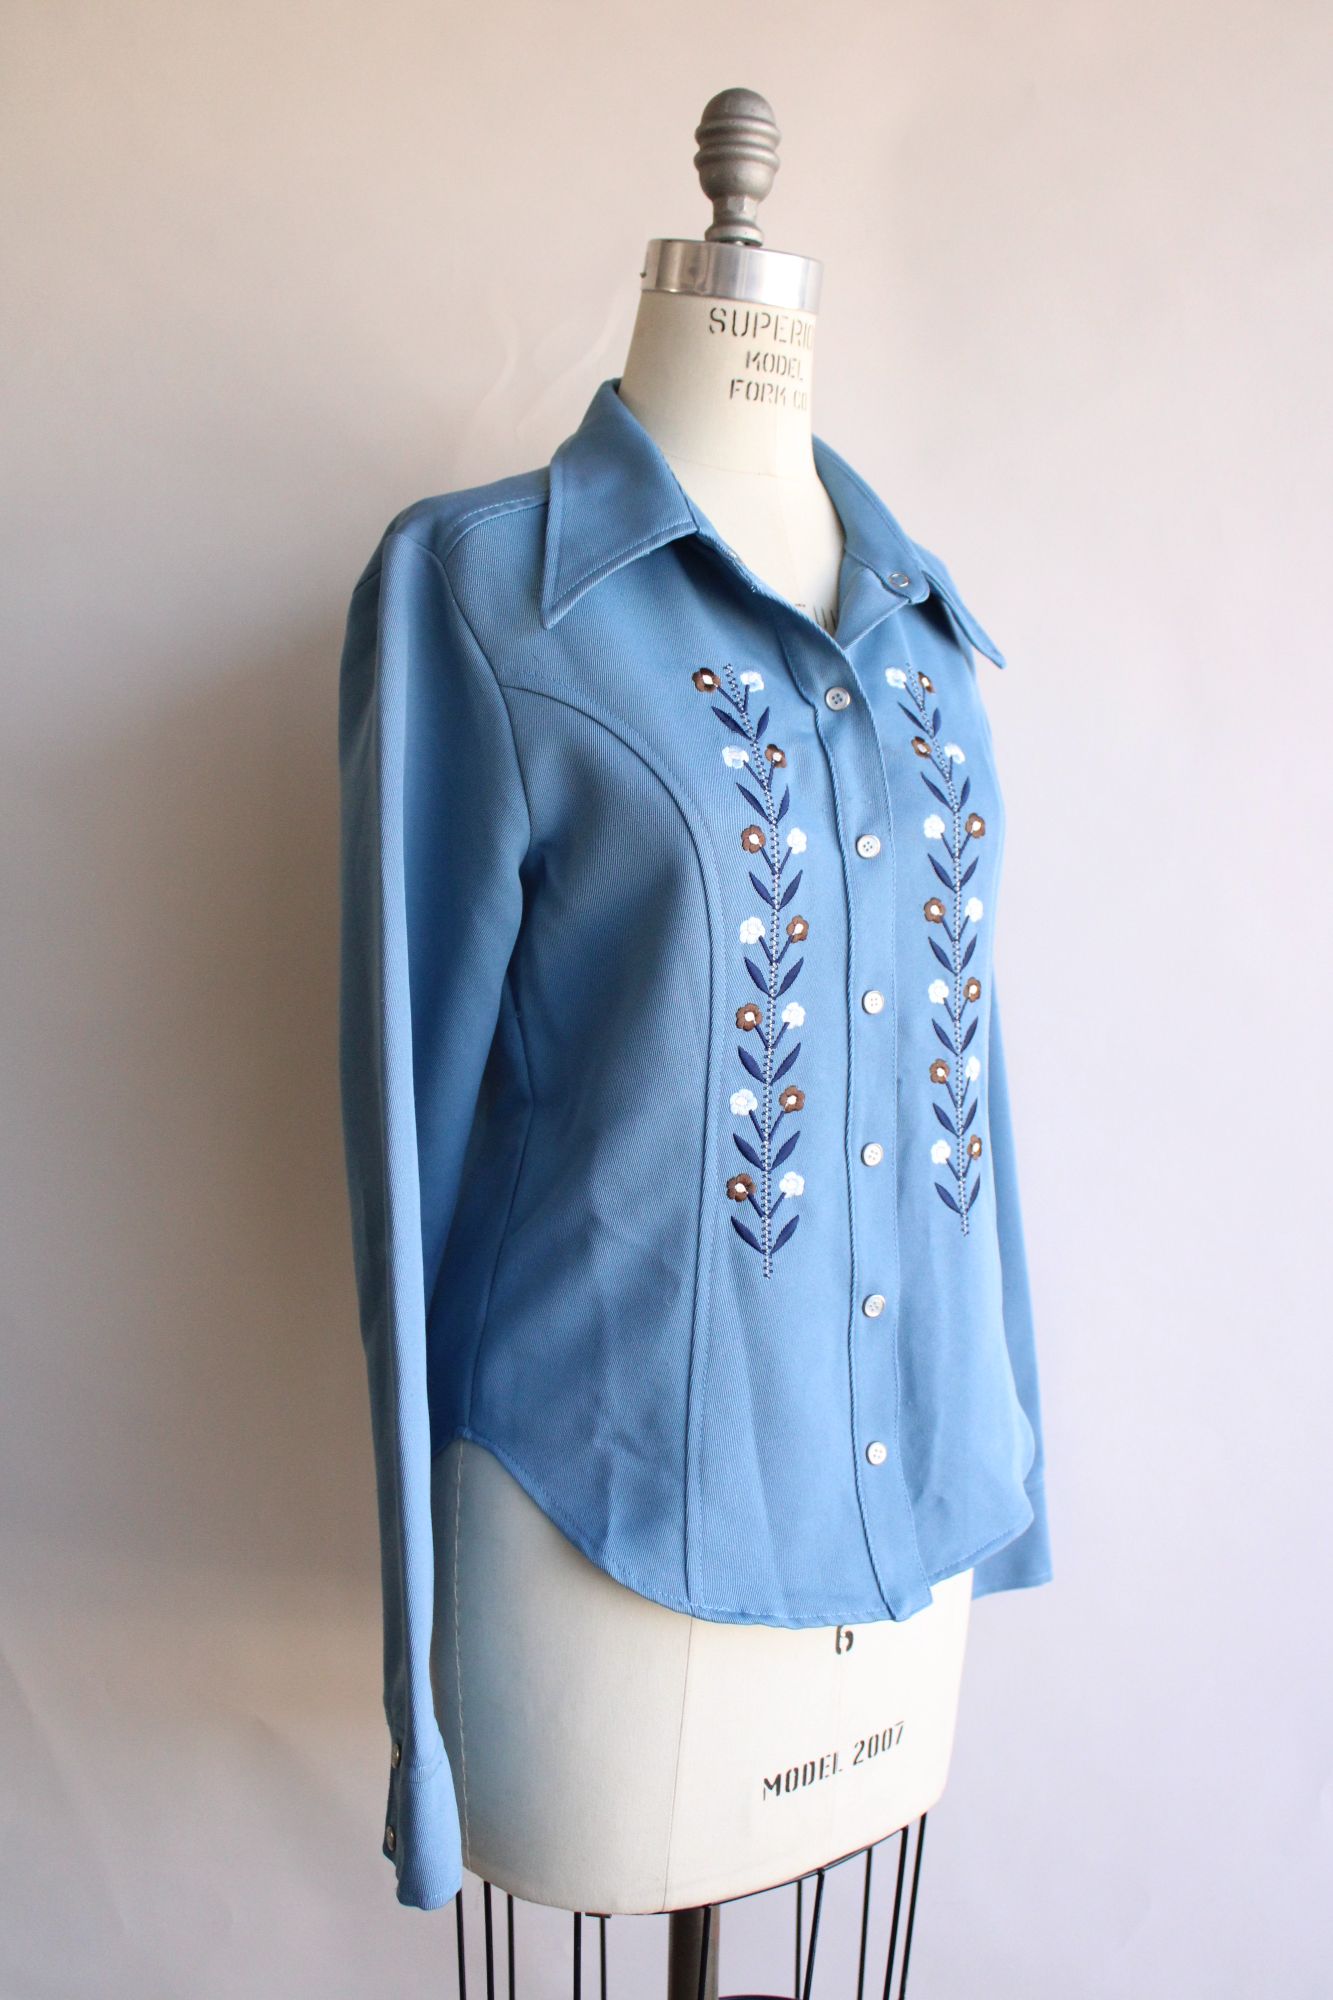 Z Cavaricci womens shirt, Size Small, Western style, blue with floral embroidery